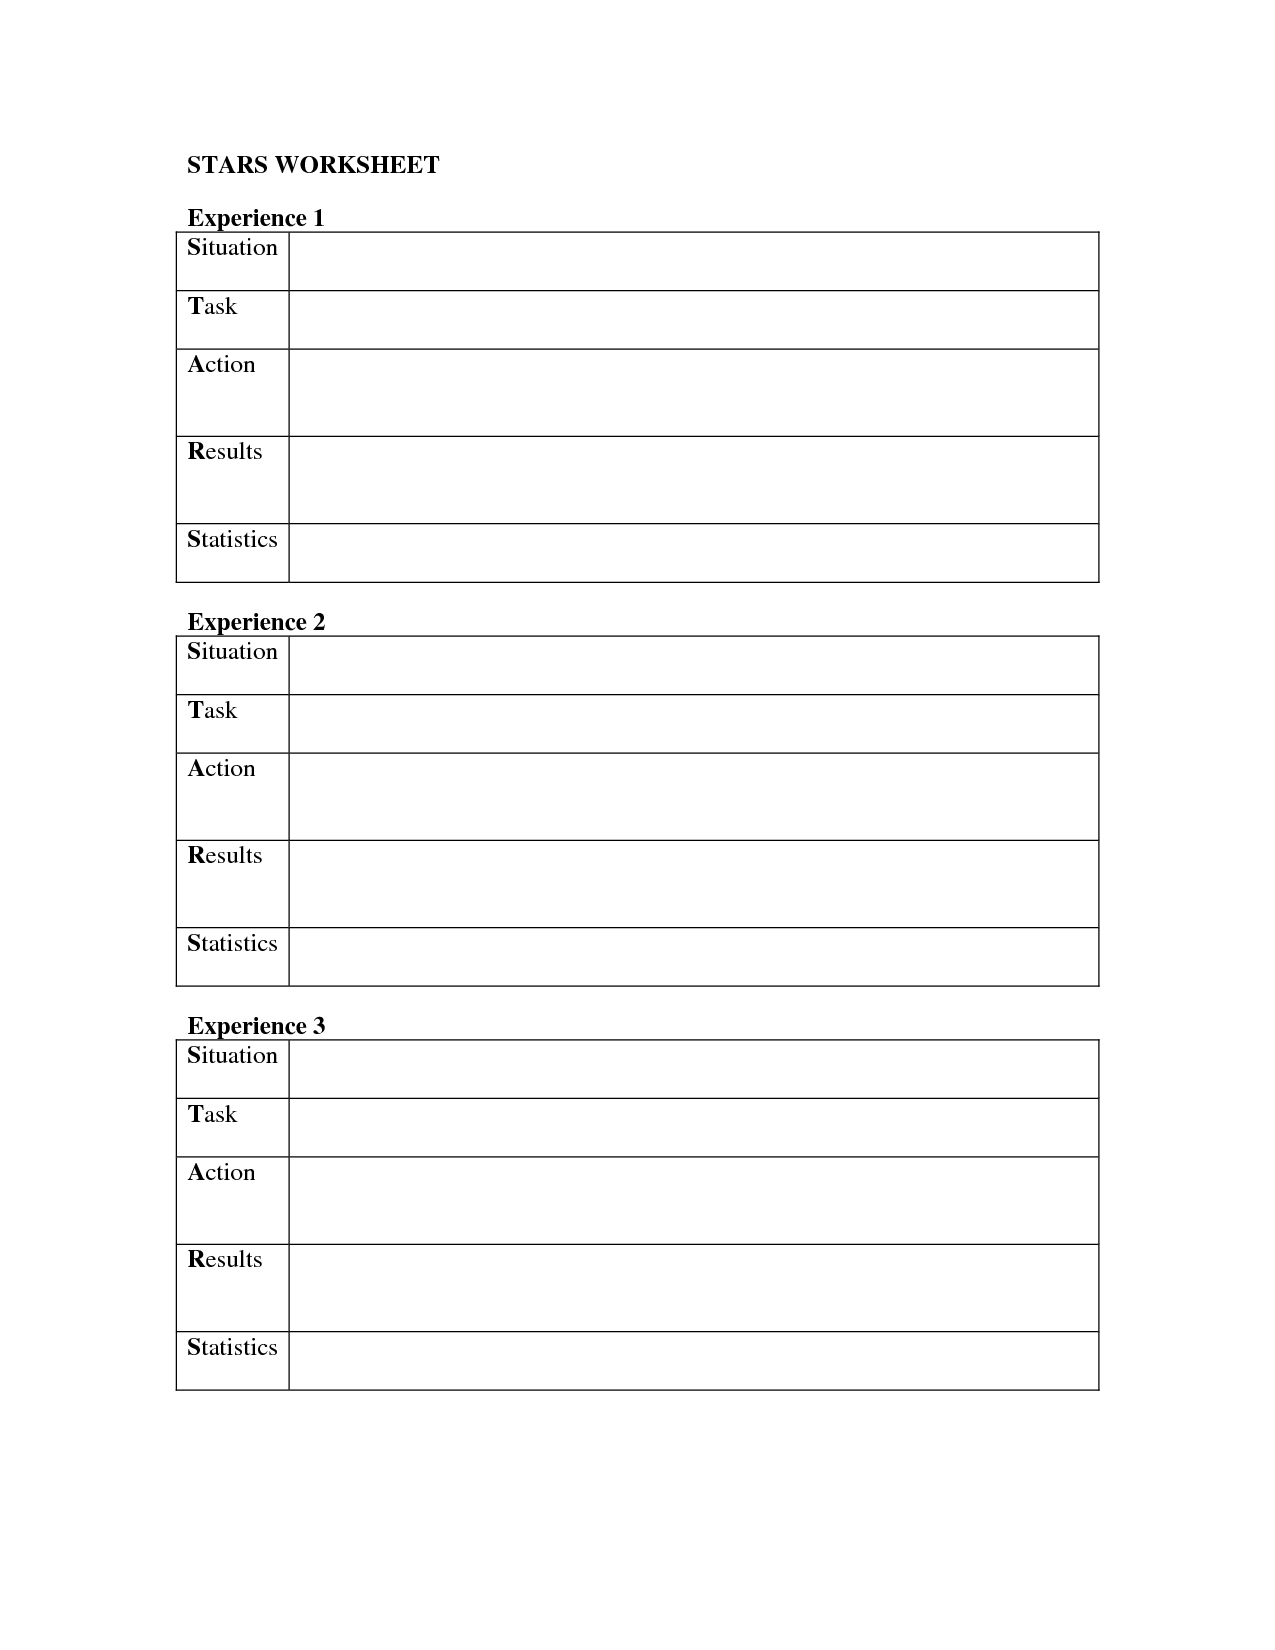 7 Best Images of Stars And Galaxies Worksheet Parallax - Star